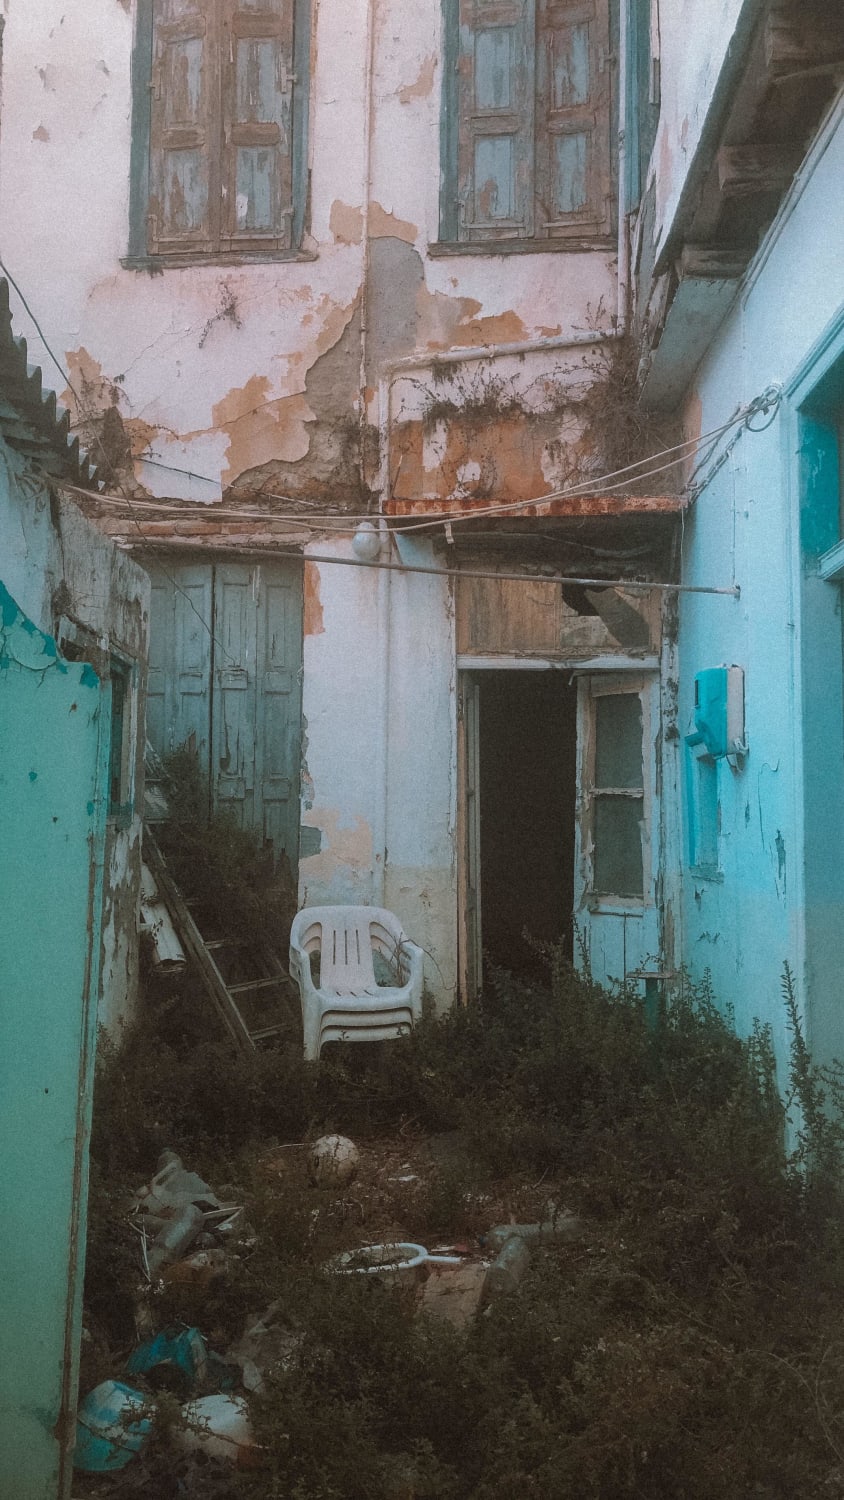 courtyard of an abandoned apartment in Iraklion Crete 🇬🇷 (might have to click to see the full image)